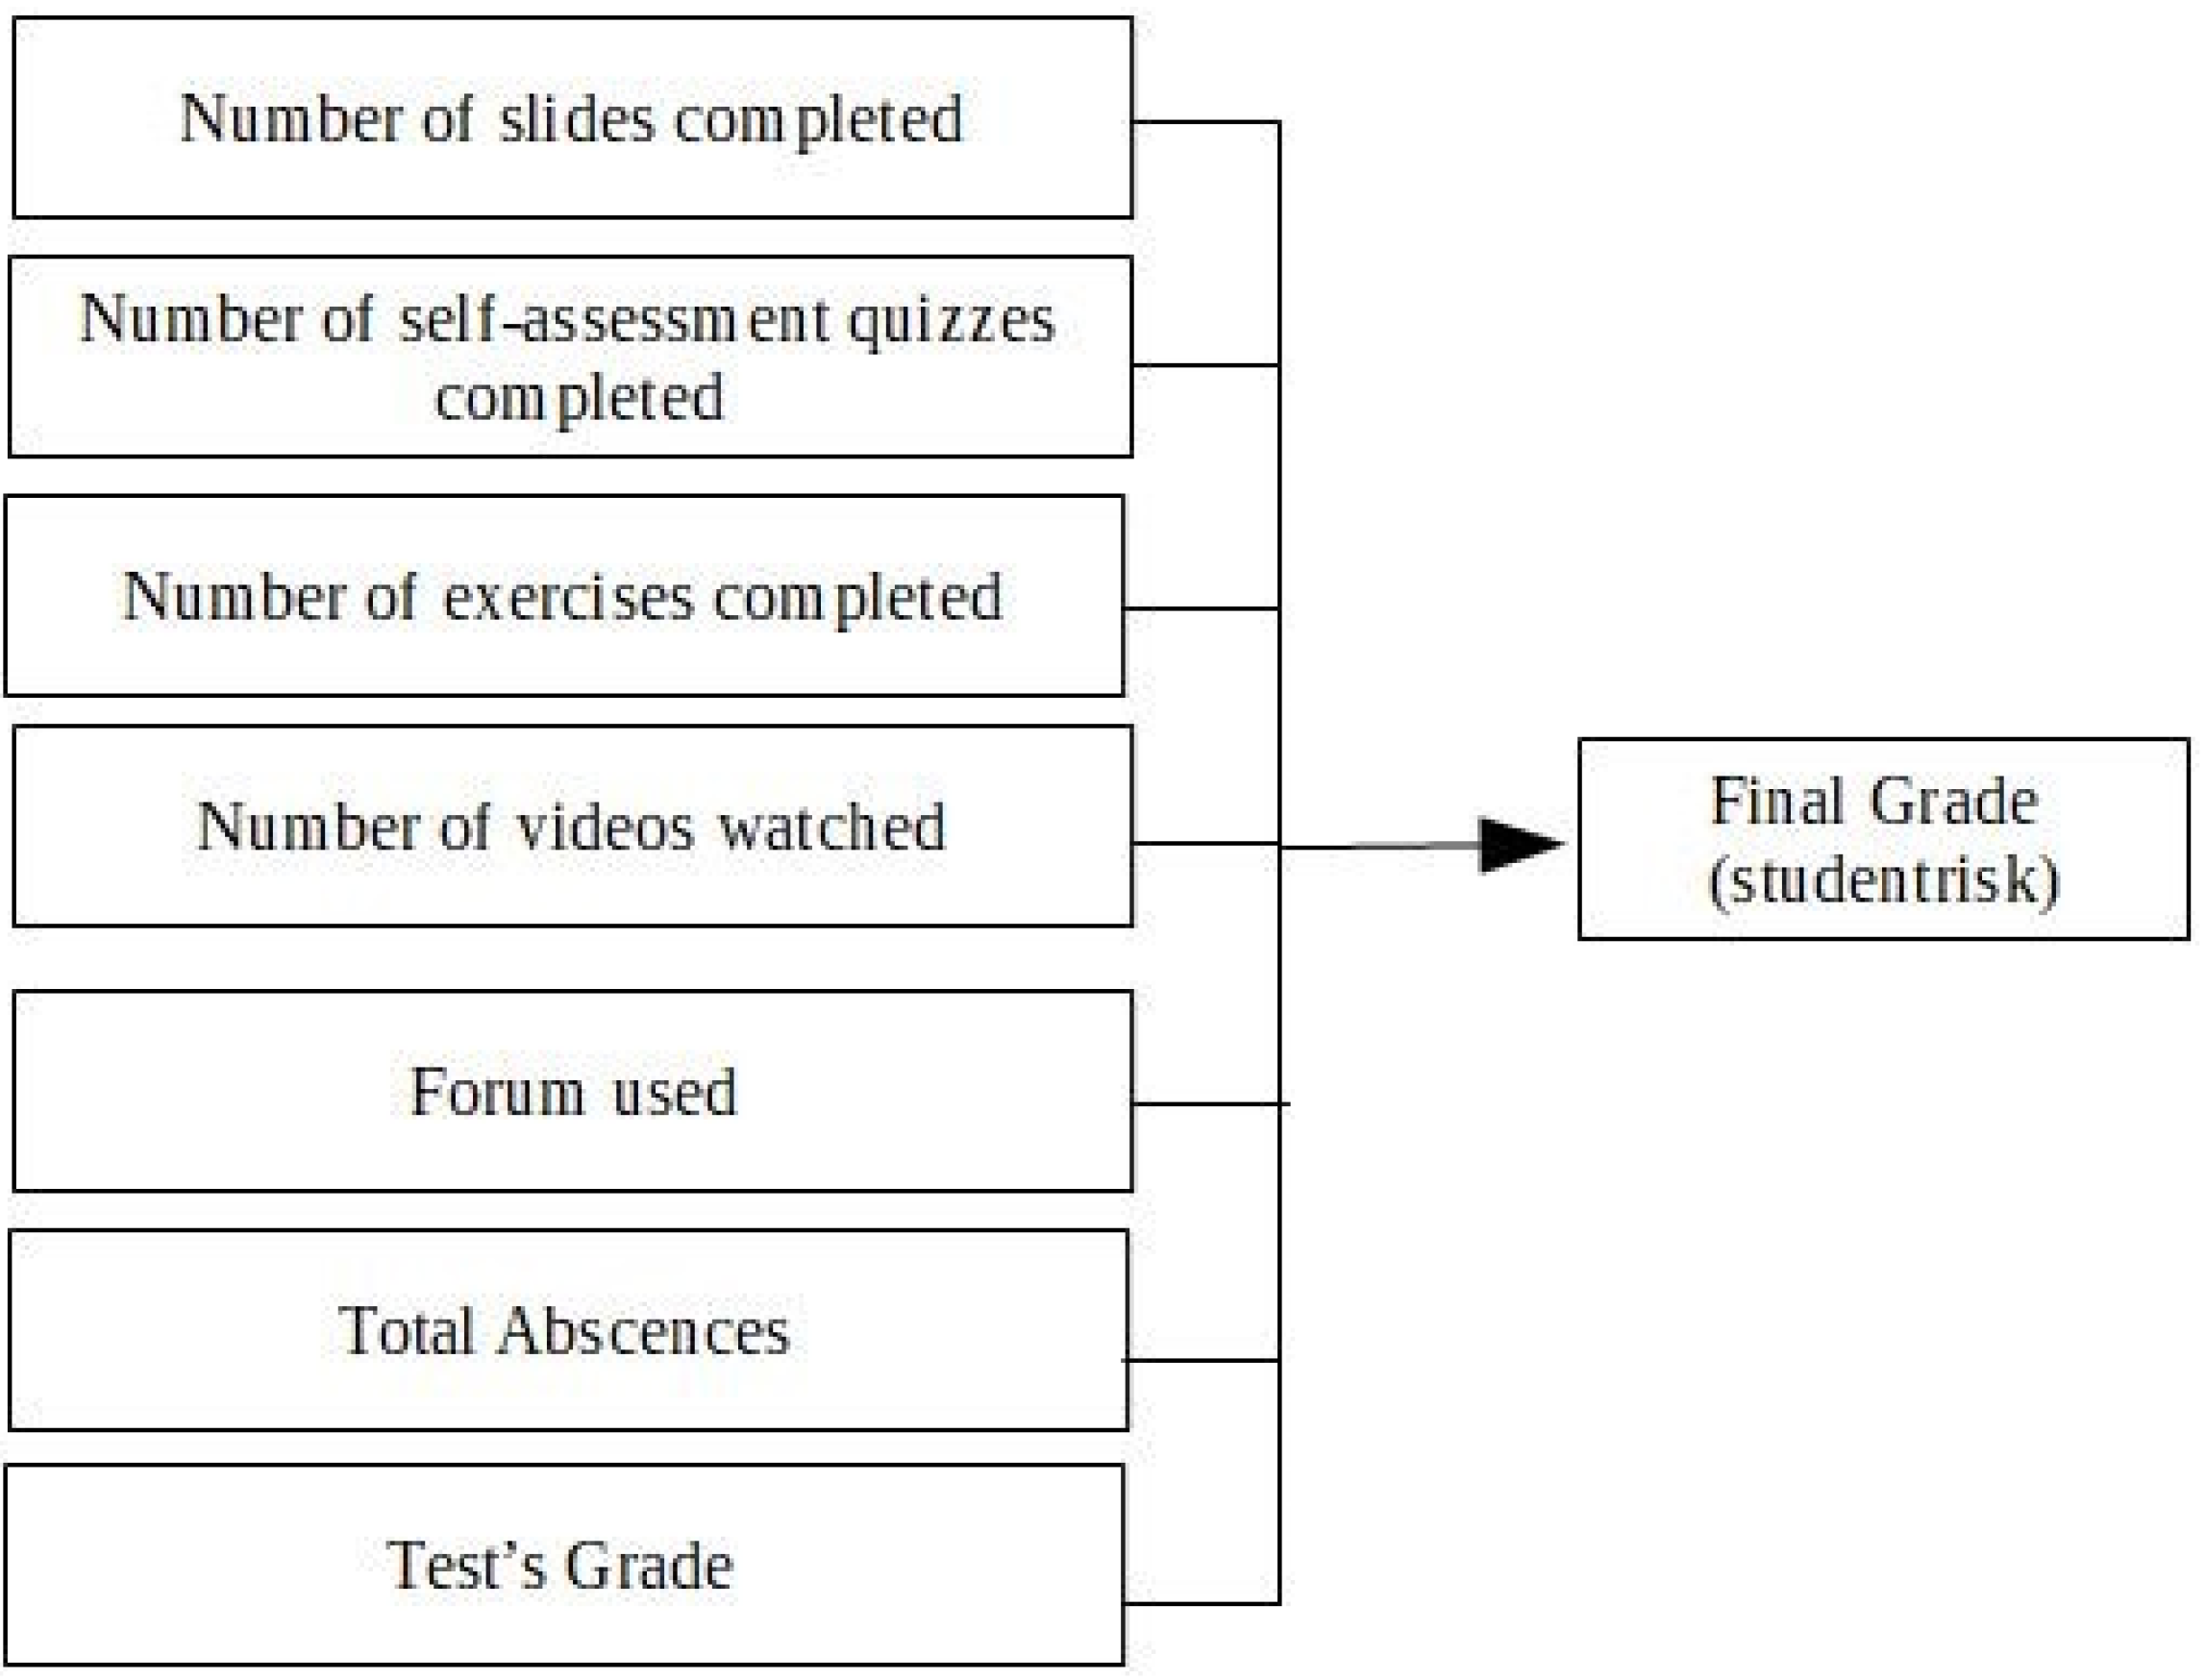 Education Sciences | Free Full-Text | Identifying Factors of Students'  Failure in Blended Courses by Analyzing Students' Engagement Data | HTML